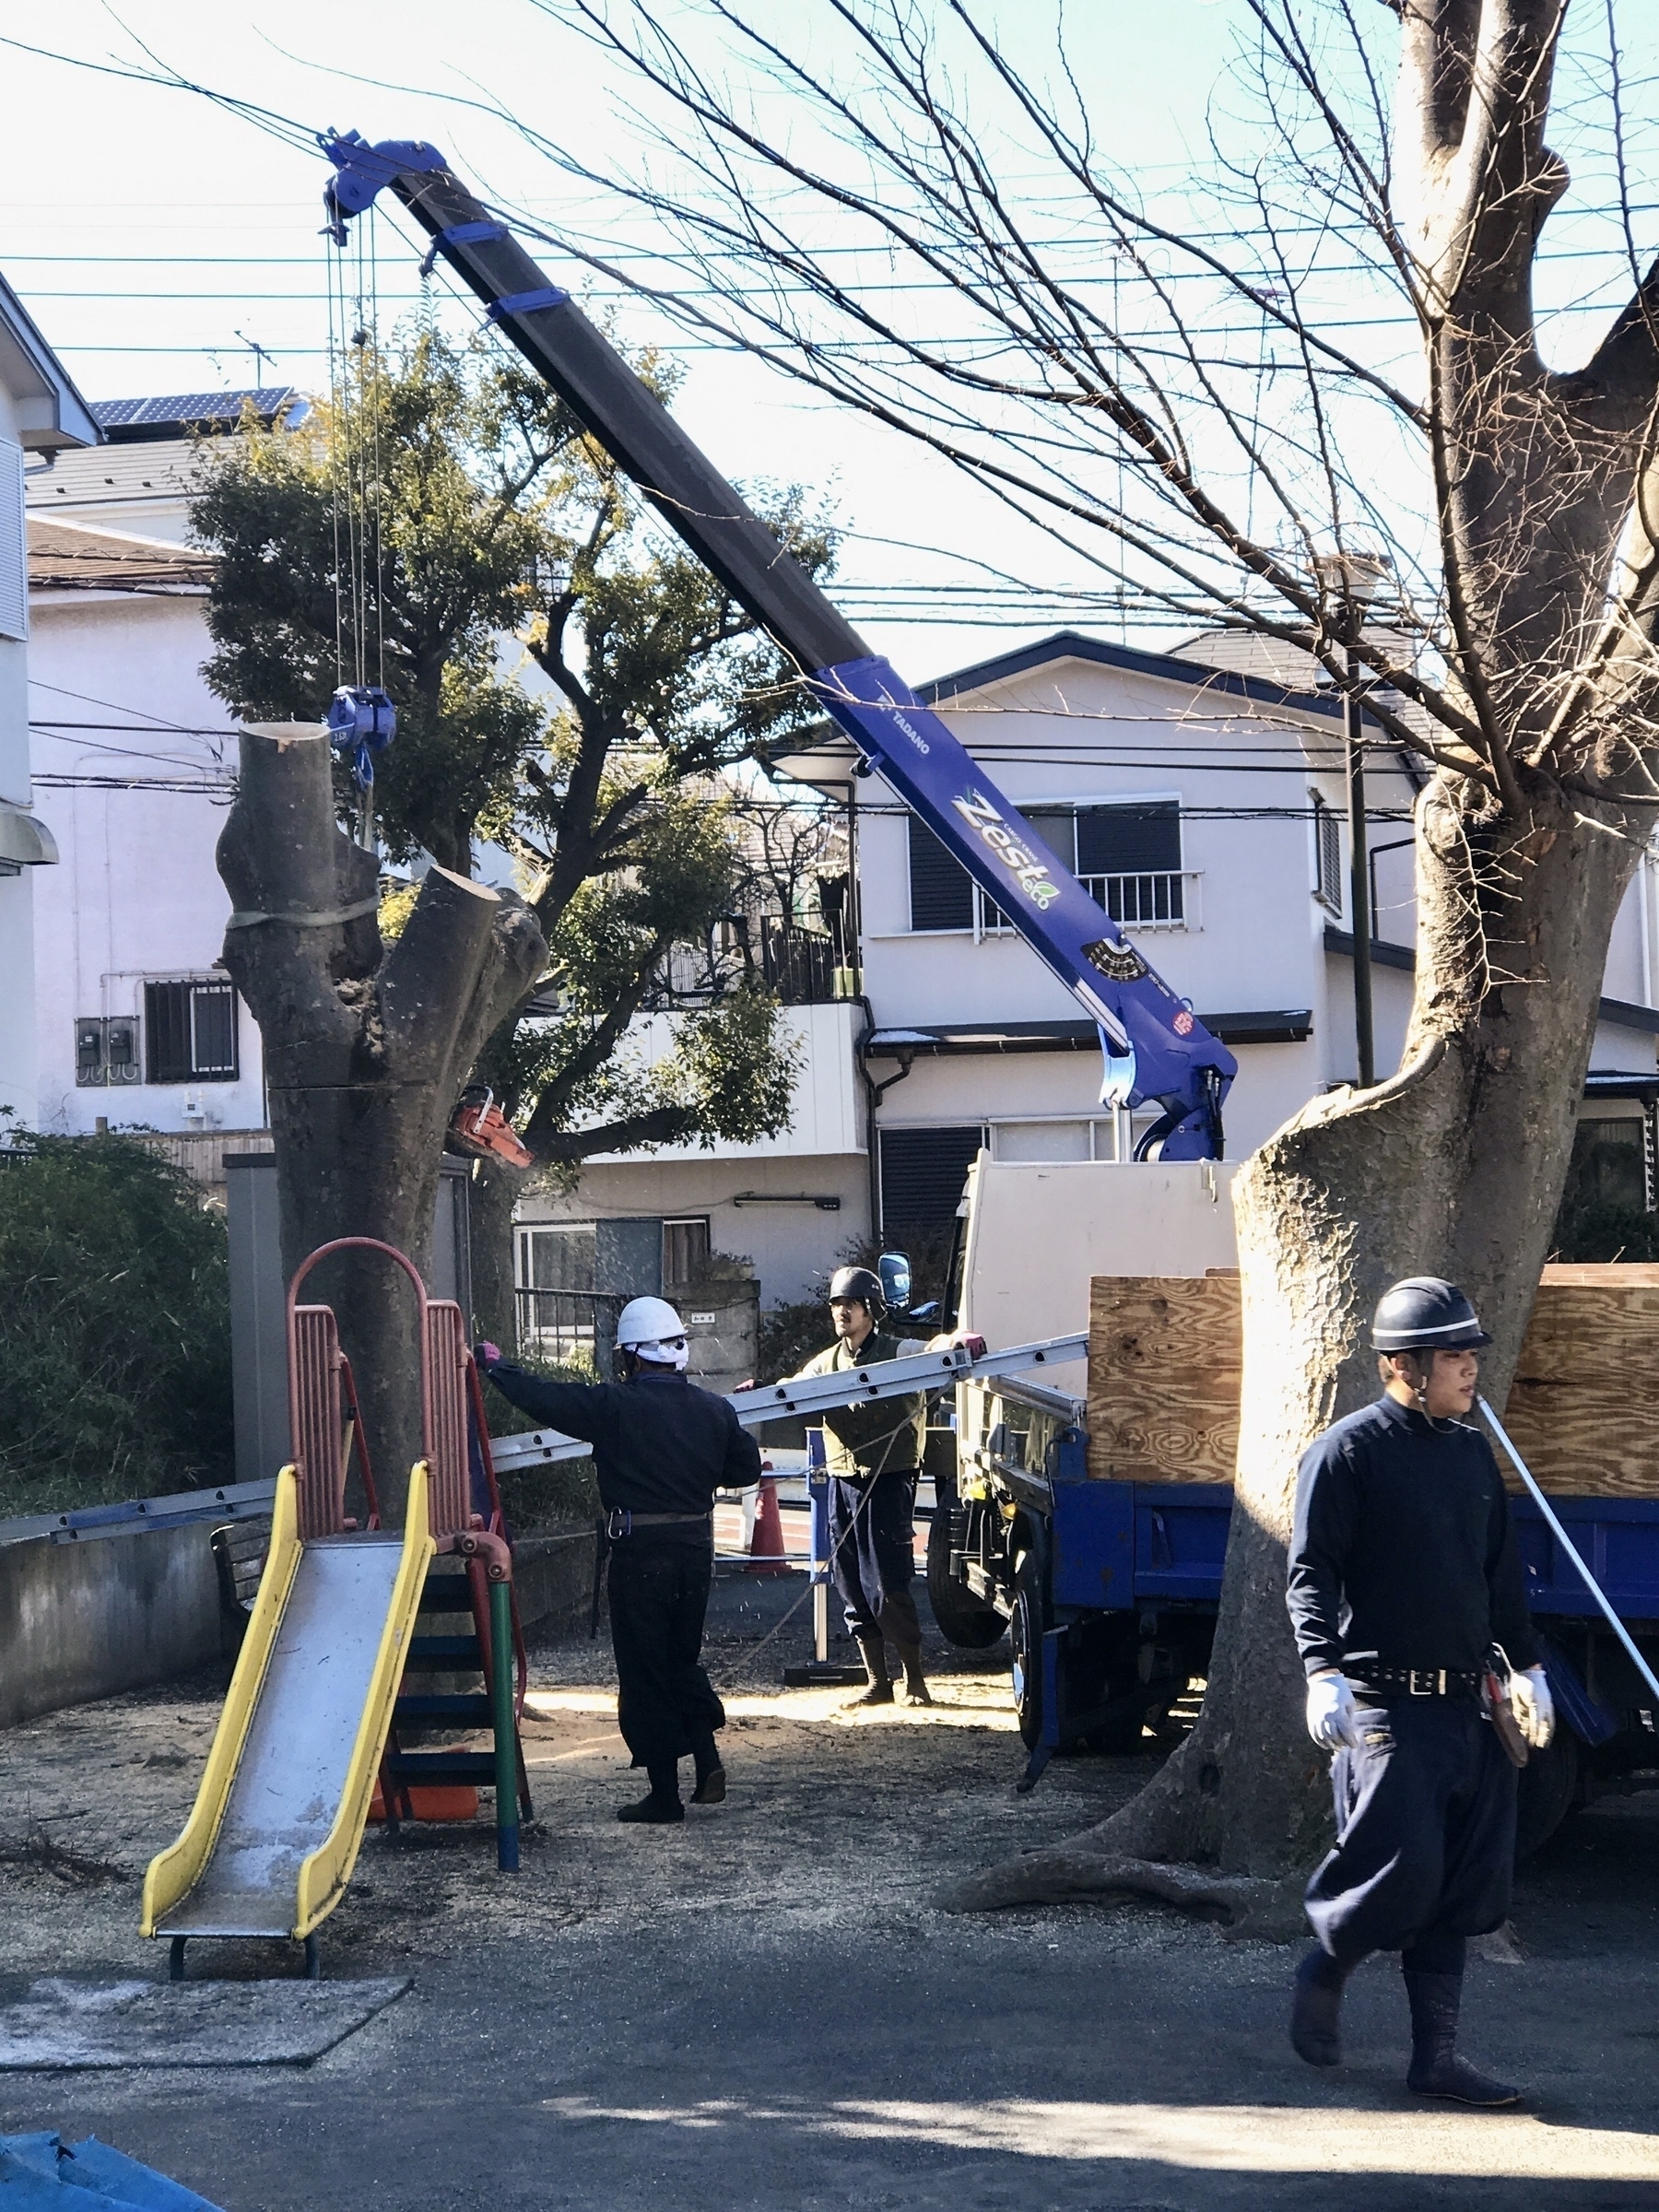 Public works workers cutting a tree in a local park, using a small purple crane and ladders to reach. 